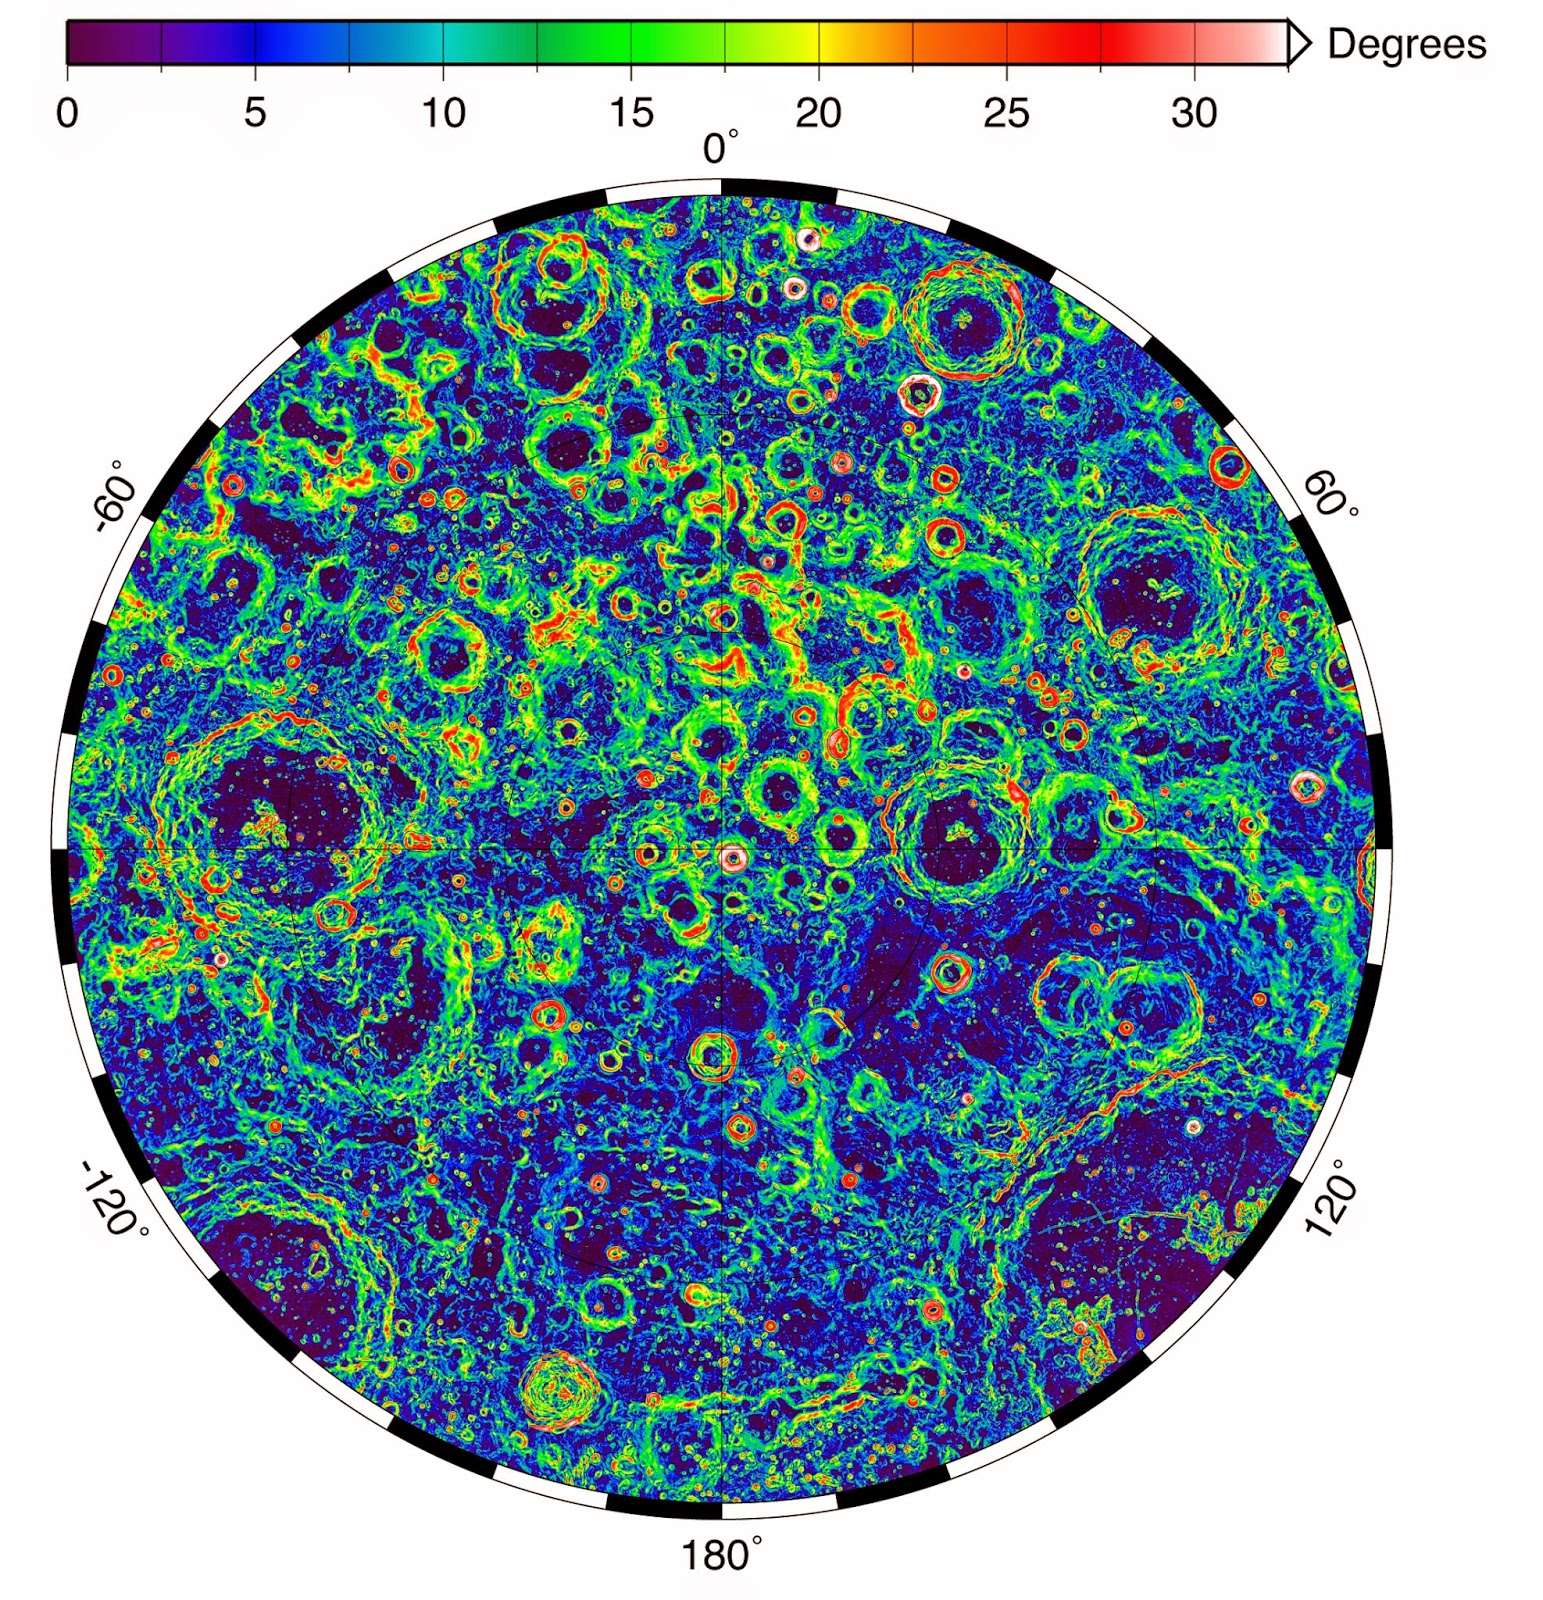 This image shows the slopes found near the South Pole of the Moon.